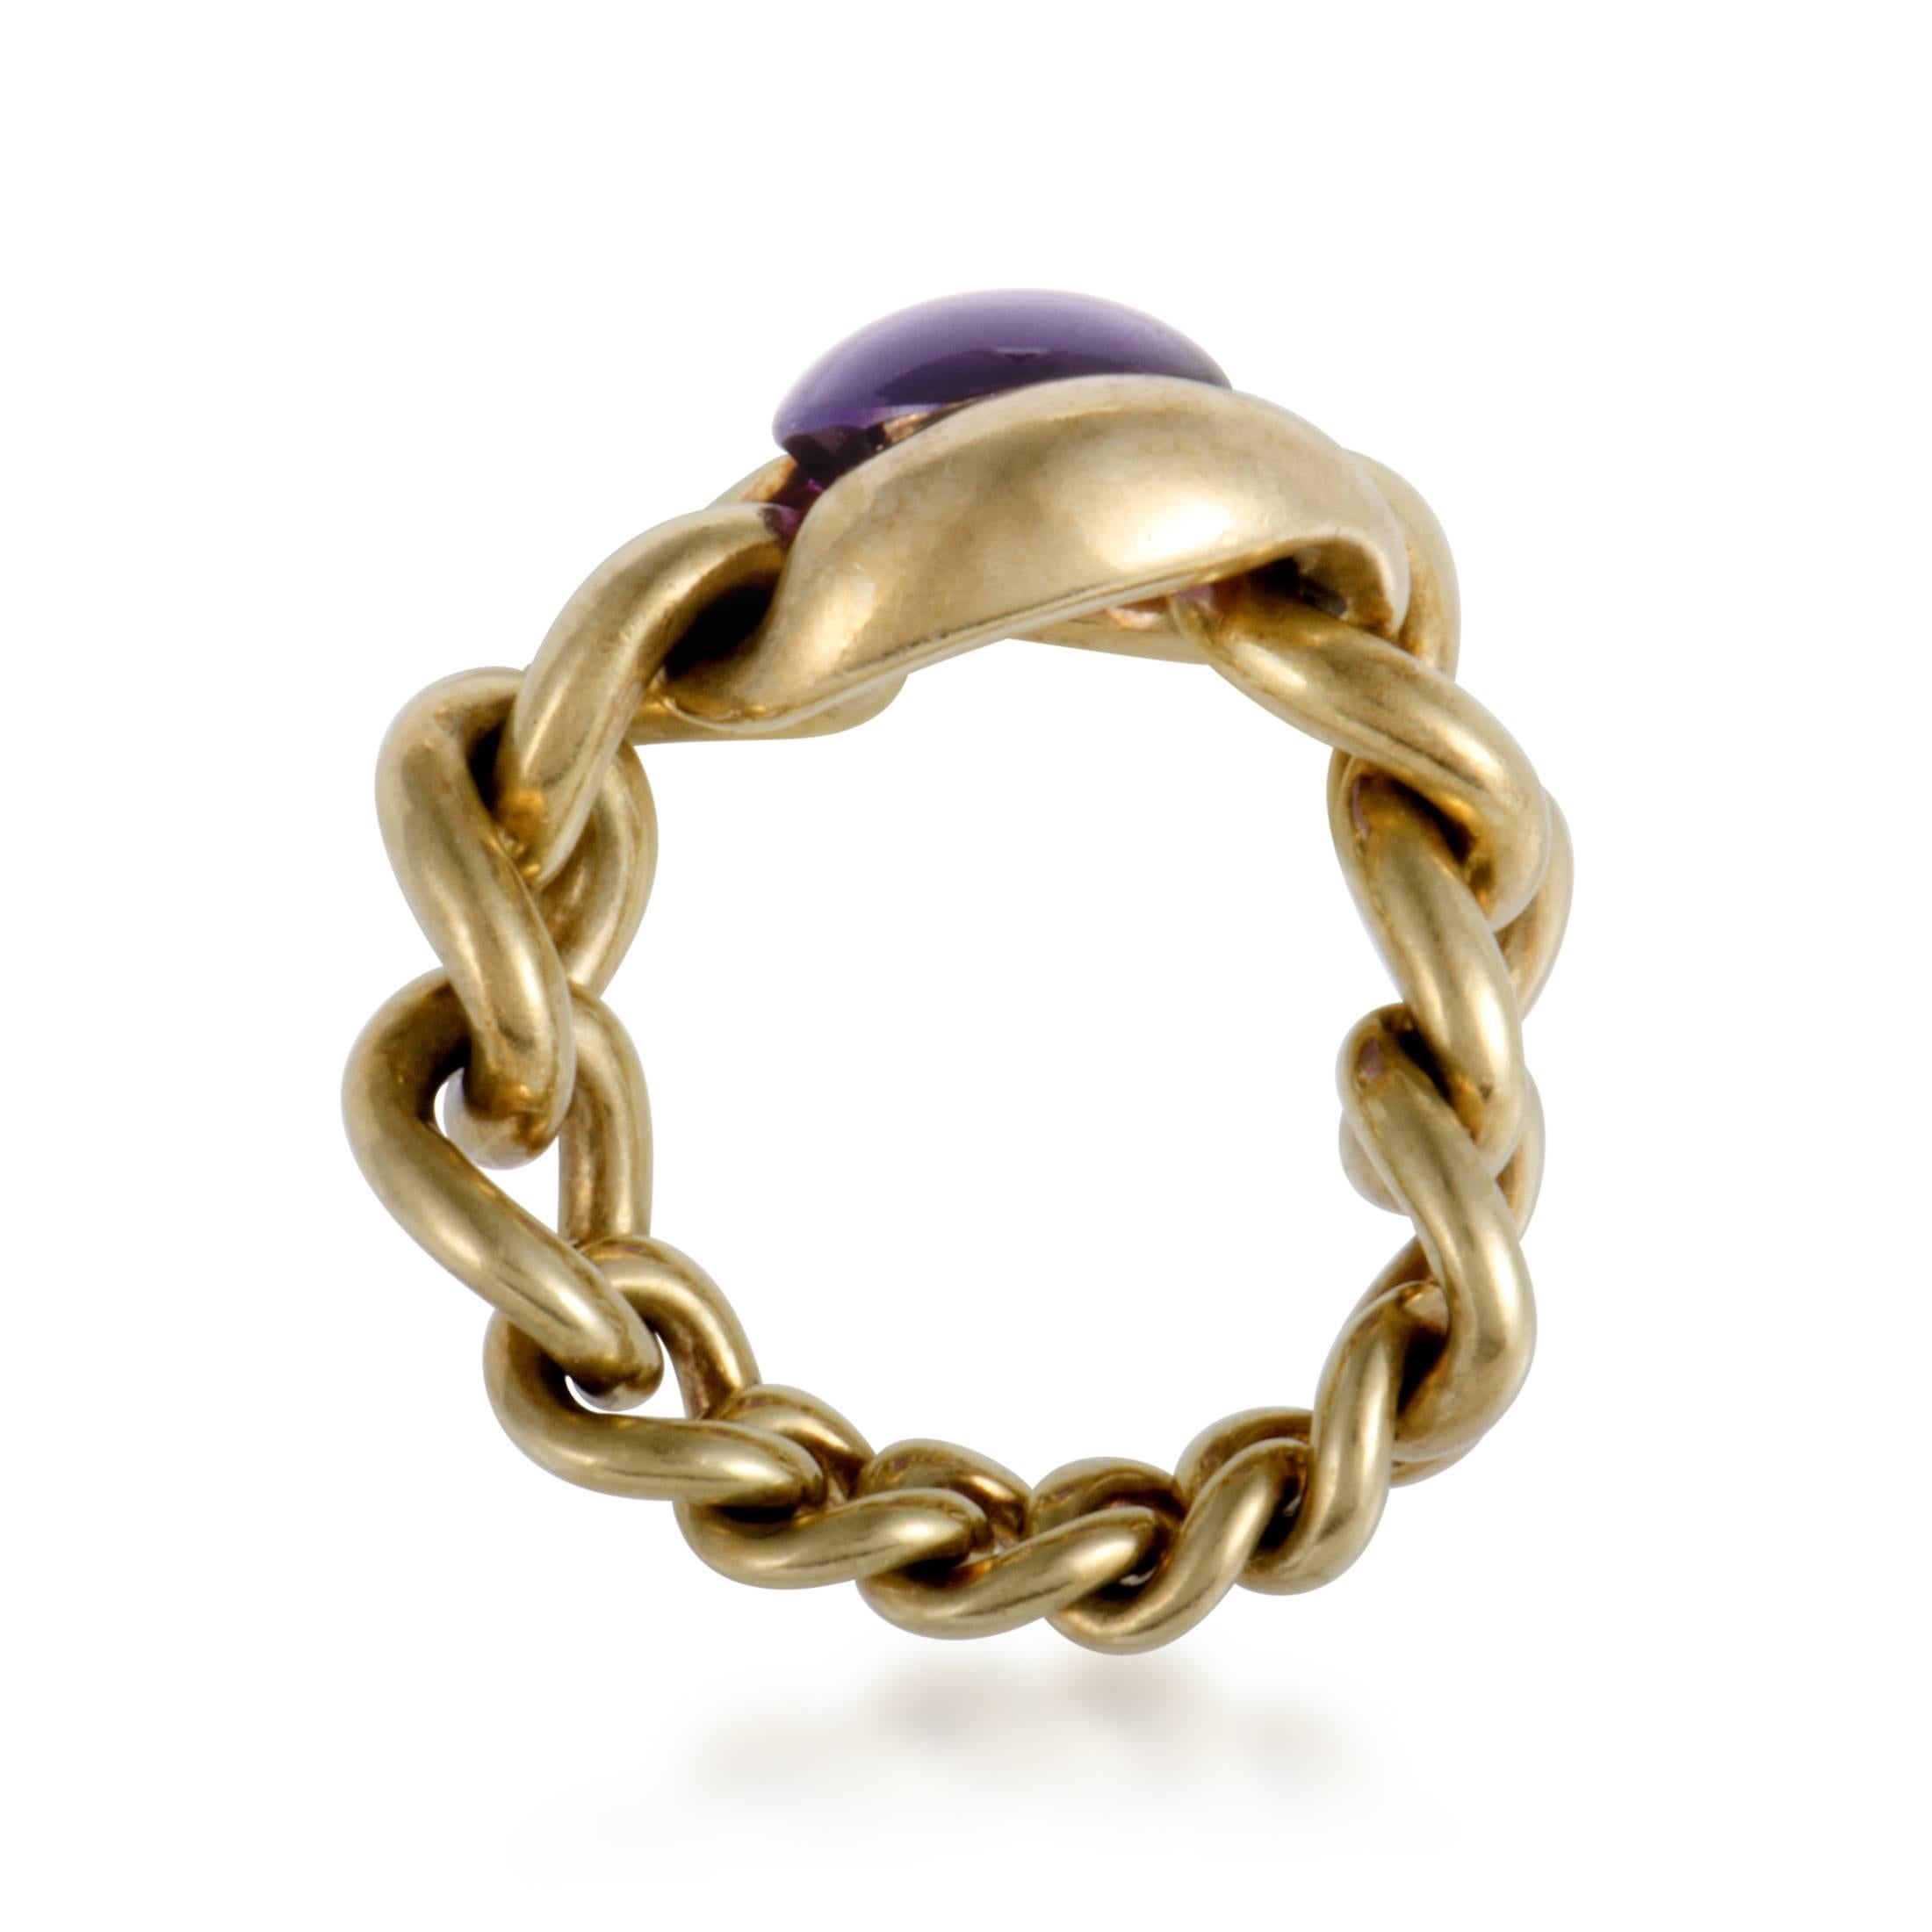 Flowing gracefully and entwining in an intriguingly smooth manner, the radiant 18K yellow gold exudes its intrinsic luxurious allure in this majestic ring from Chanel which is set with a delightful amethyst to add compelling color to the